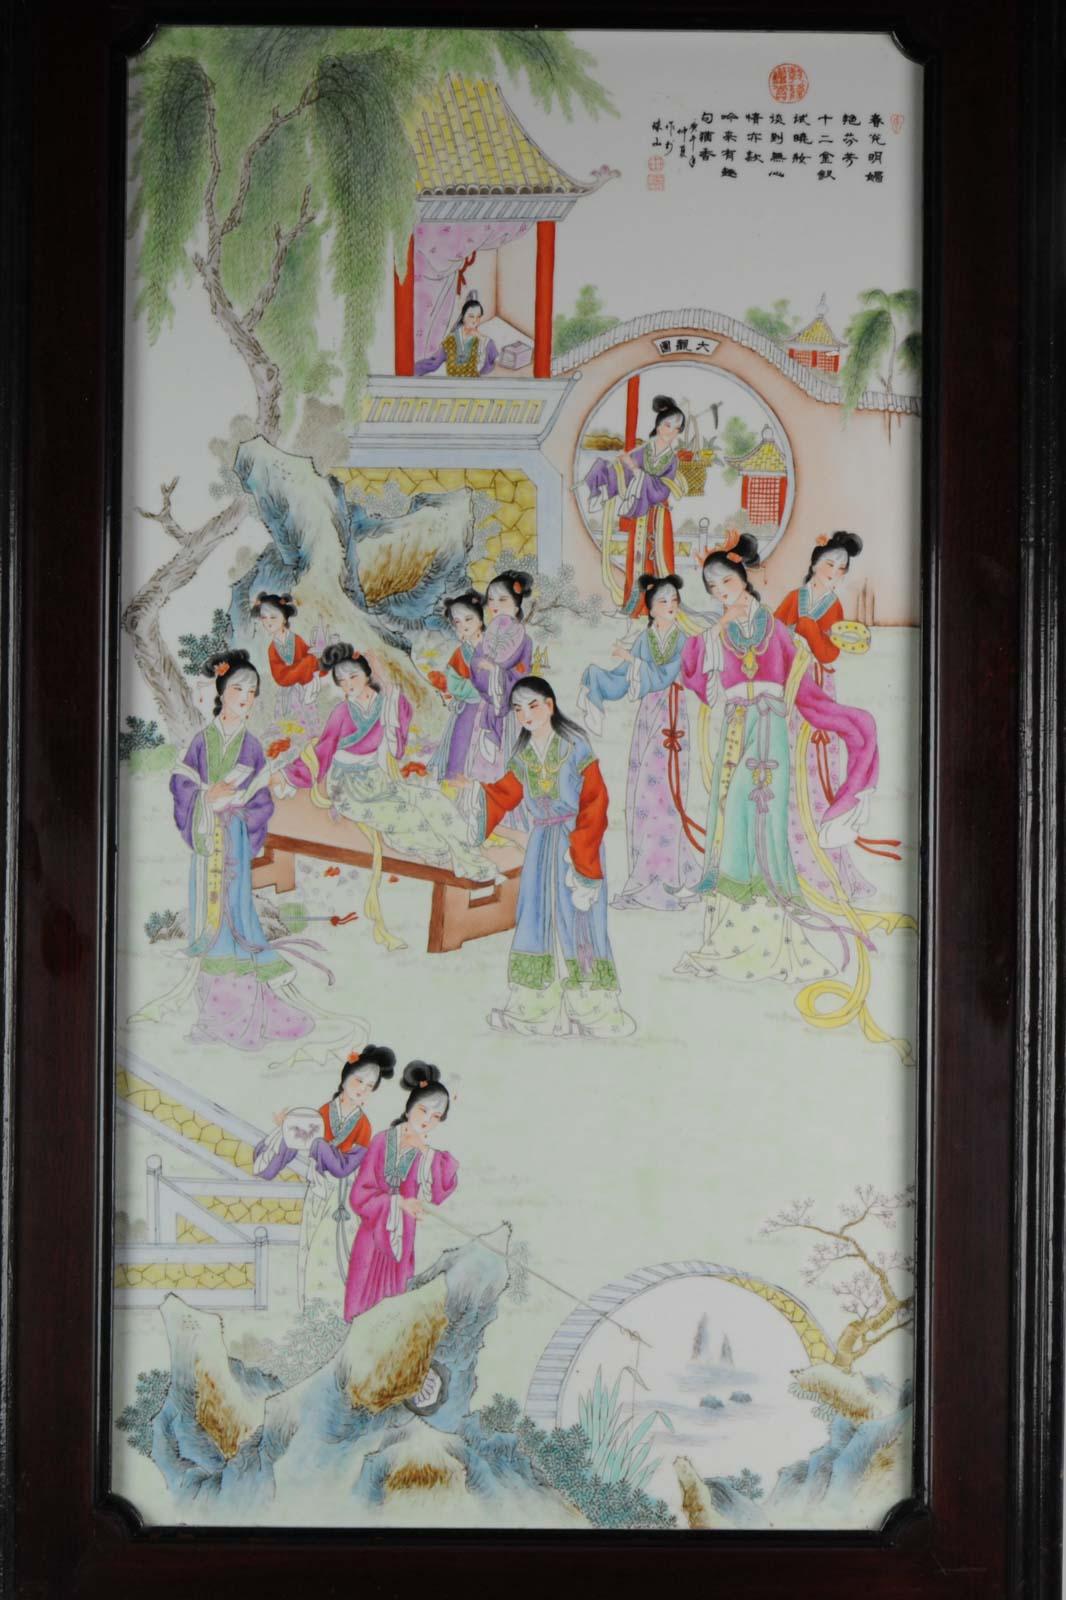 Porcelain plaque in nice wooden frame, with characters ladies in a garden. Made in 1982. Marked with seal mark

11-10-19-16-1

The plaque will be sent with track and trace, safely packed and insured.

 

 
Condition
Overall condition